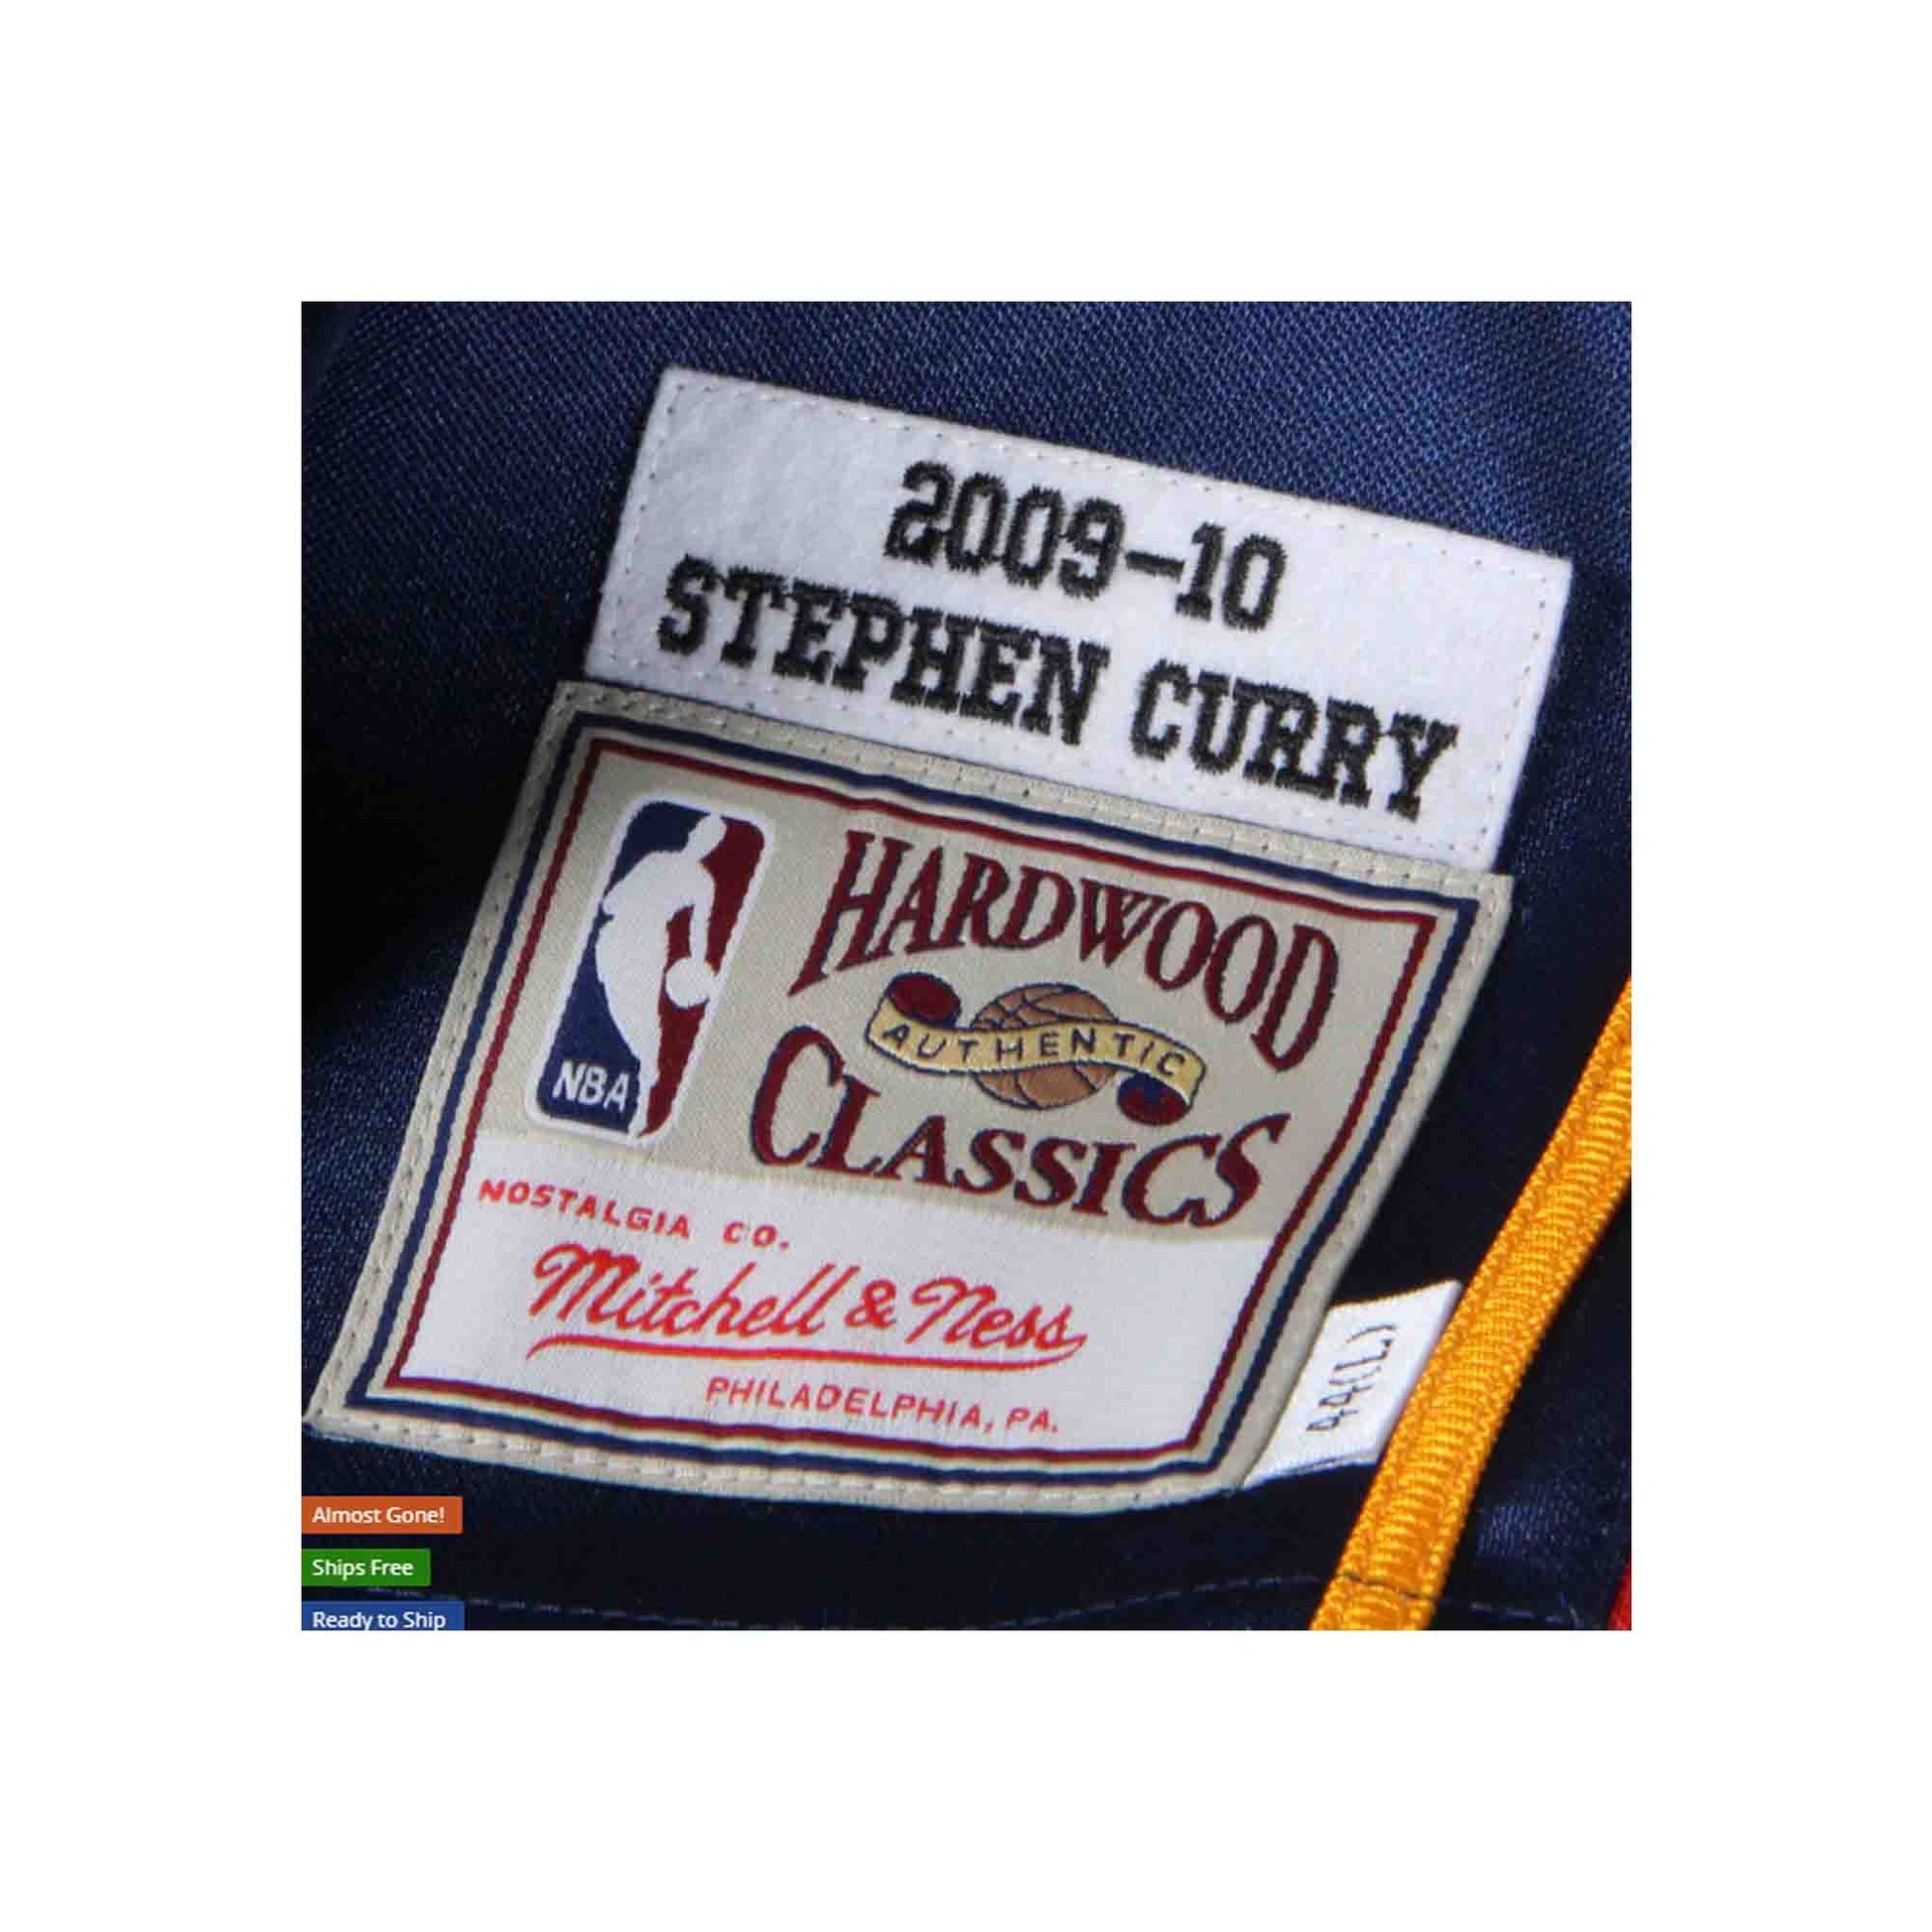  Mitchell & Ness Stephen Curry 2009-10 Authentic